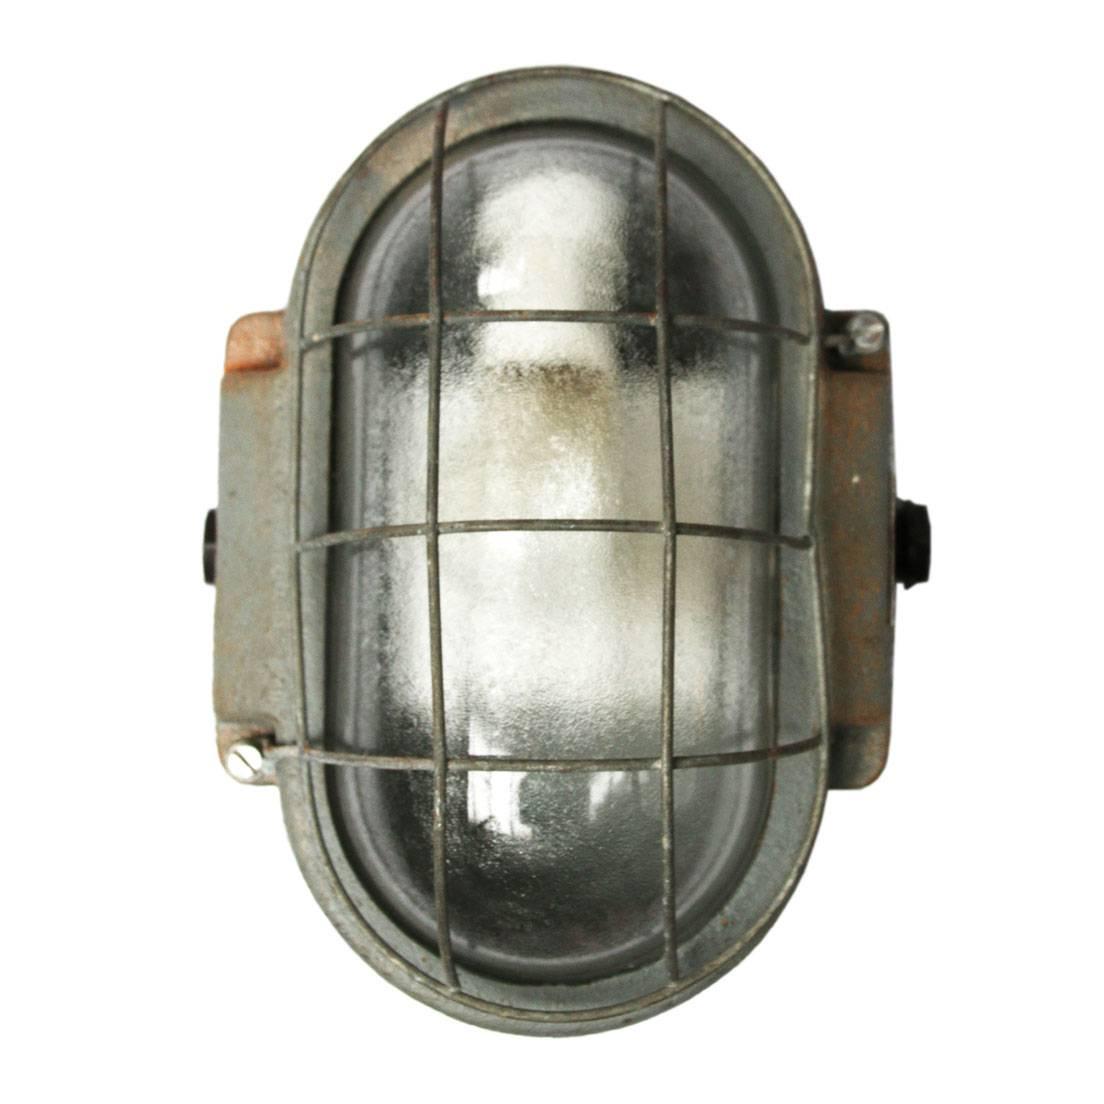 Blazim semi. Industrial wall-lamp. Cast iron. Semi frosted glass.
Suitable for use outside.

Measure: Weight 6.0 kg / 13.2 lb

All lamps have been made suitable by international standards for incandescent light bulbs, energy-efficient and LED